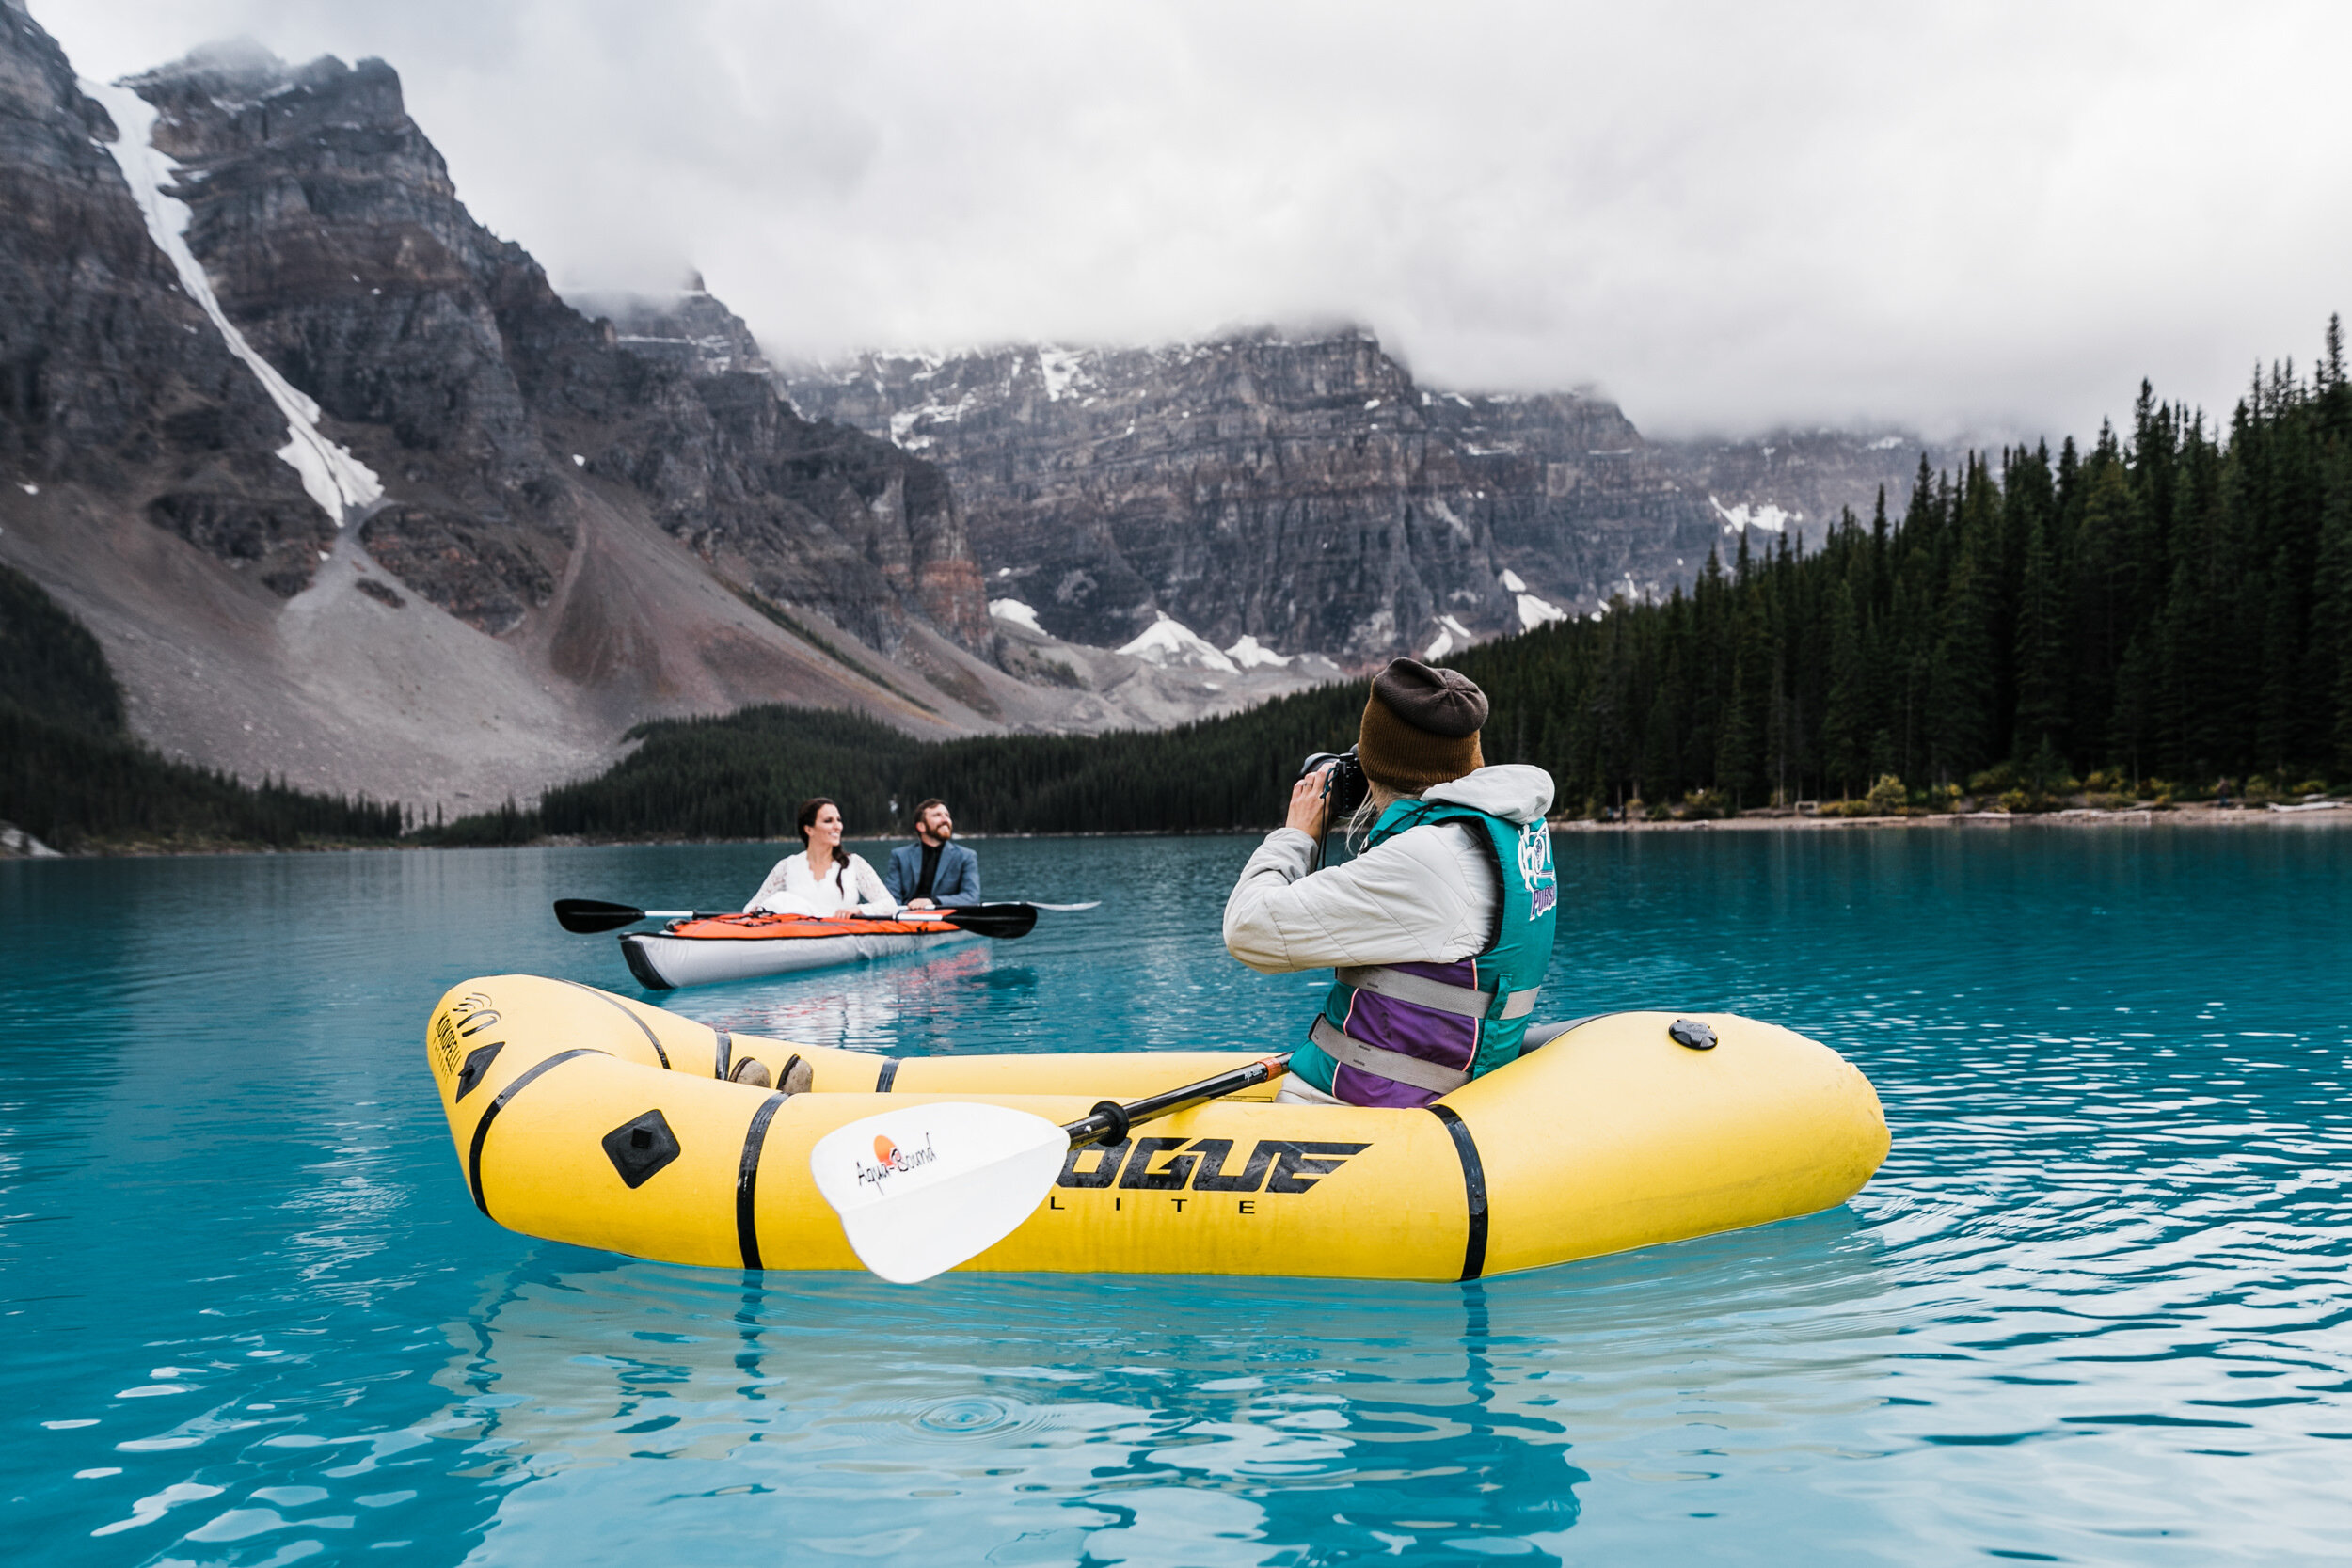 The Hearnes are Wedding Photographers in Canada | Banff National Park Adventure Elopements